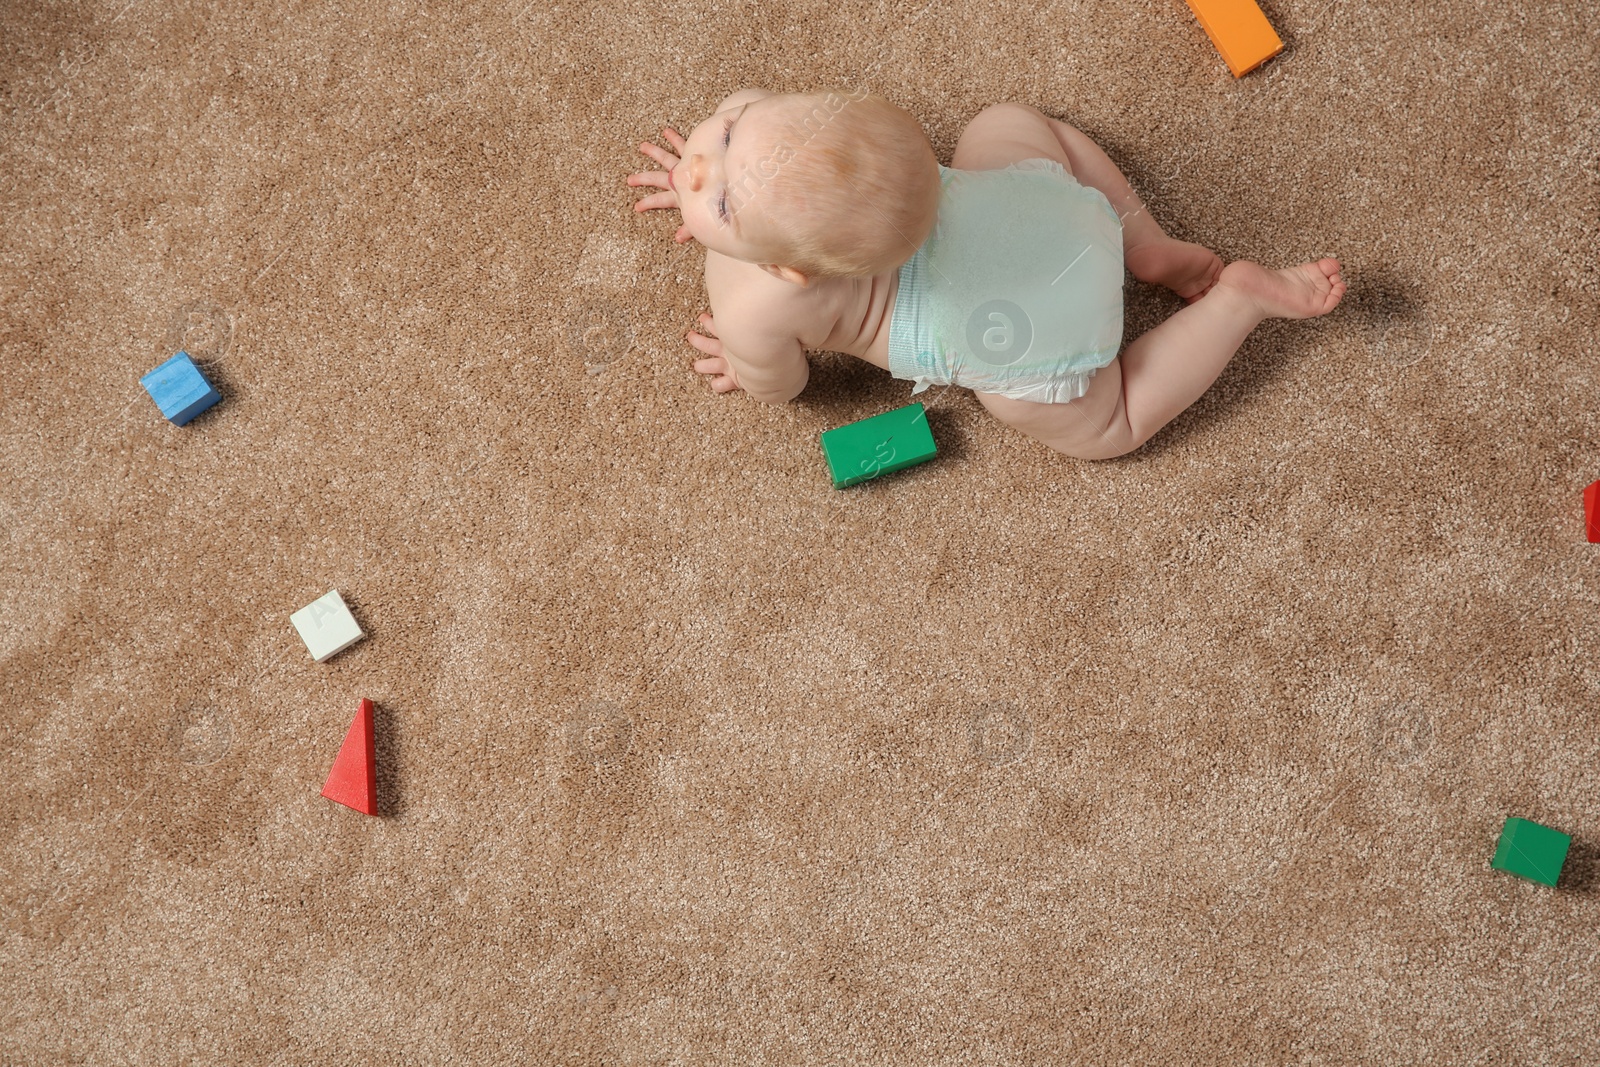 Photo of Cute little baby crawling on carpet with toys, top view. Space for text